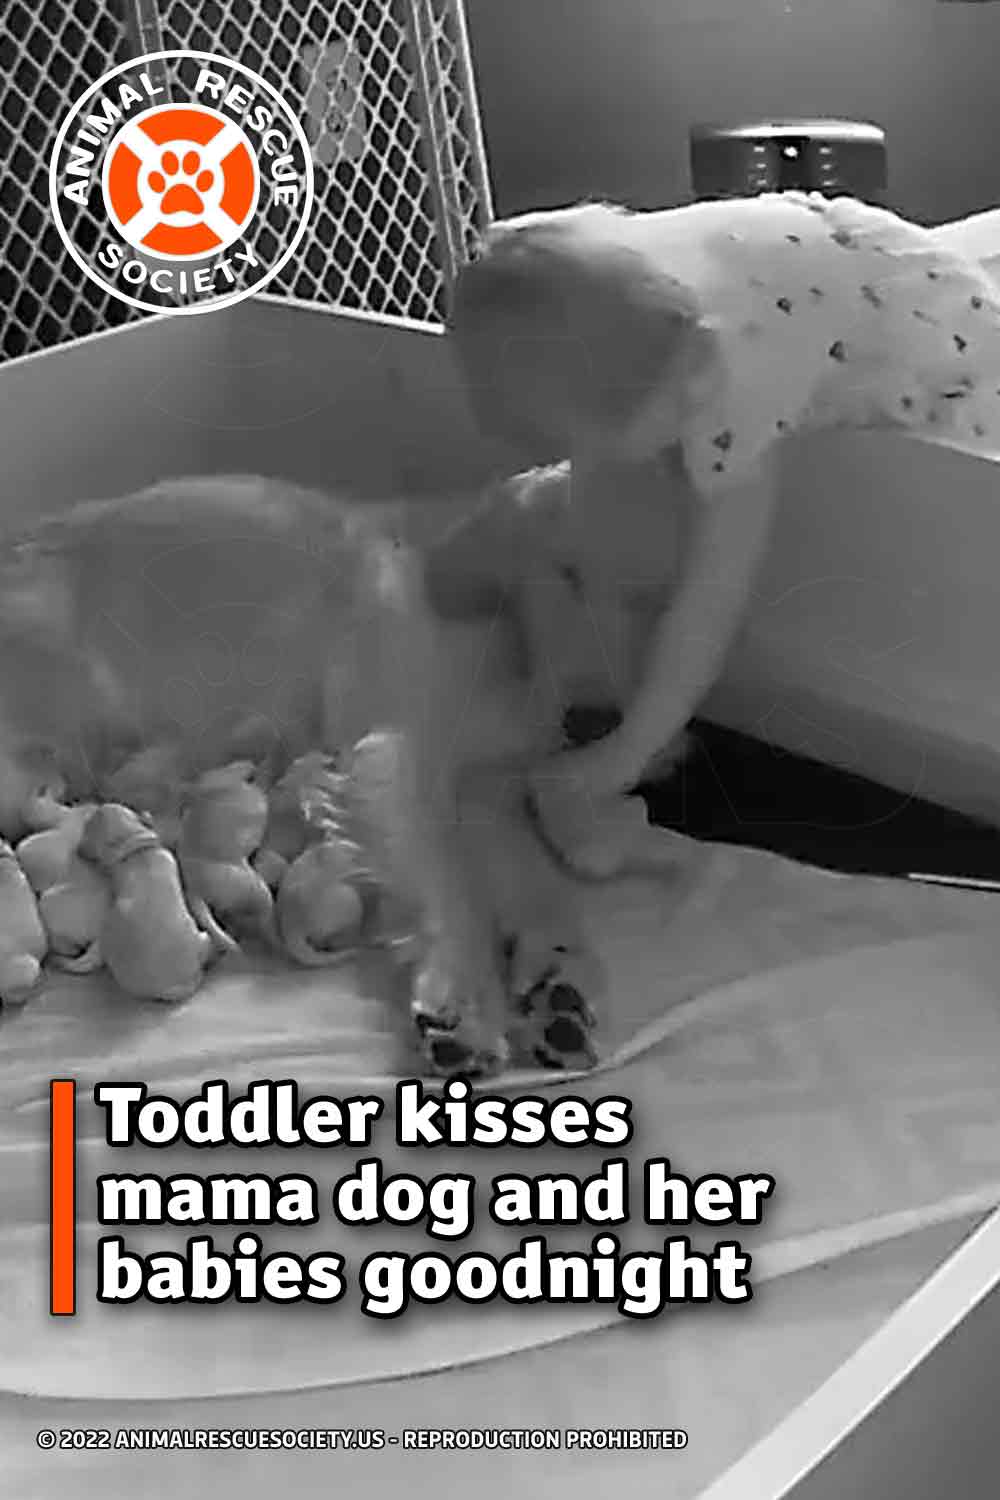 Toddler kisses mama dog and her babies goodnight